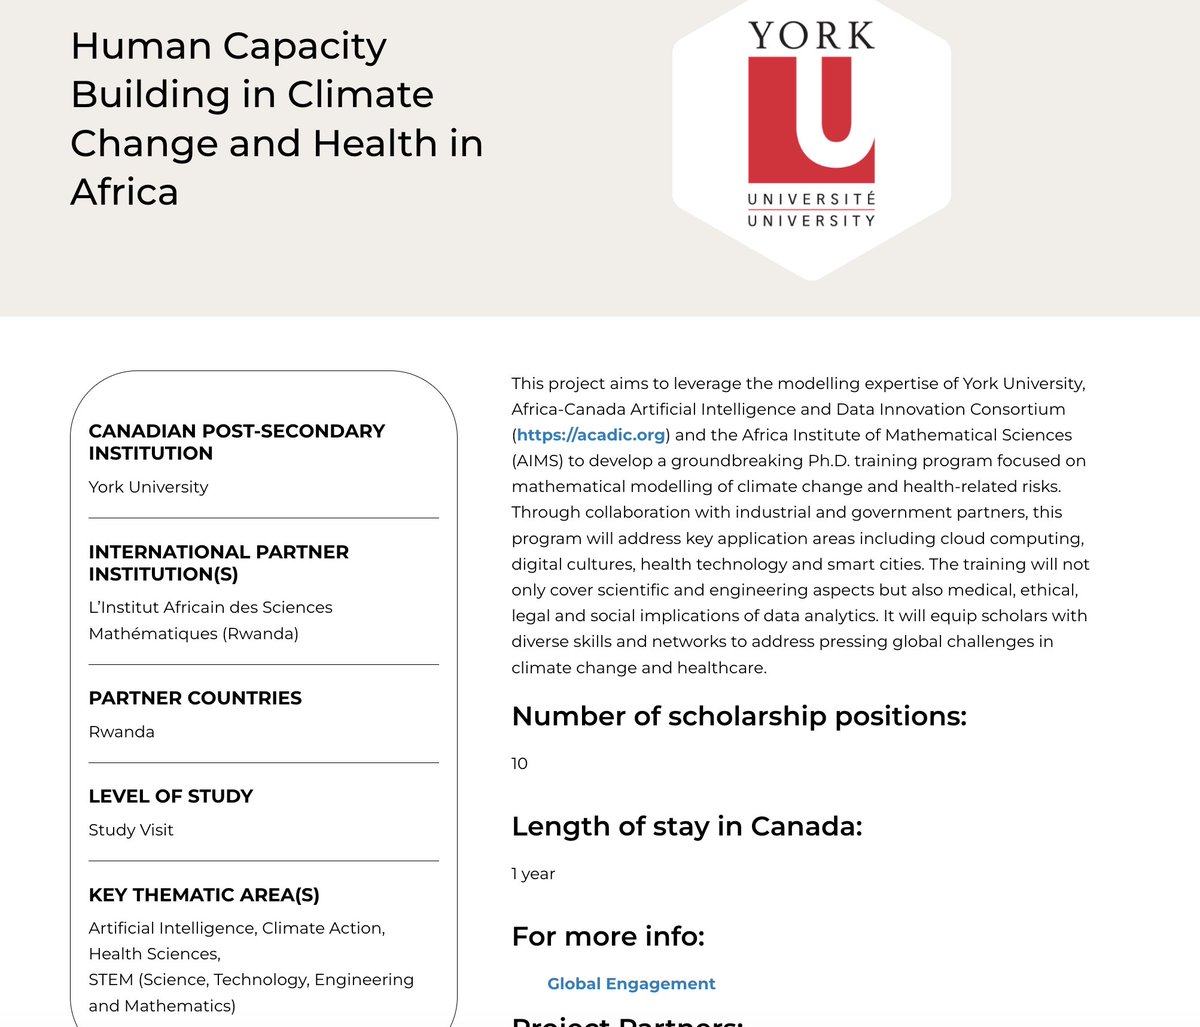 Exciting News! I am thrilled to announce that we have received $582,702 ($377,702 from @GAC_Corporate & $205,000 from YU) to train 10 African Ph.D. students in math modeling of climate change & health (@). Grateful to @GAC_Corporate @univcan for making this possible. @bcdi2030